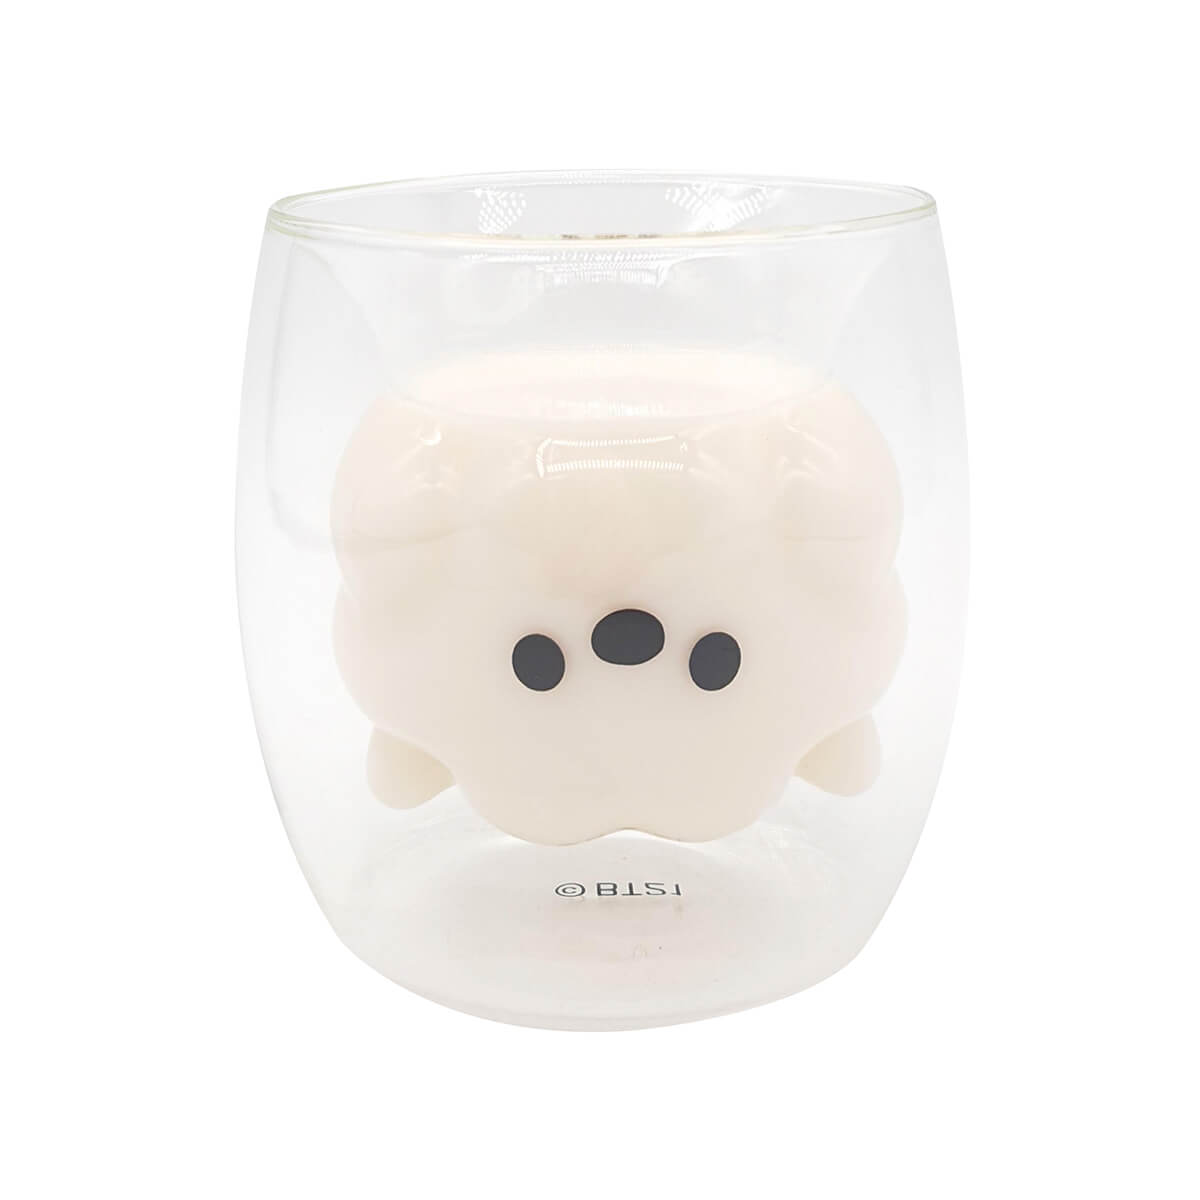 BT21 RJ Double Wall Glass Cup